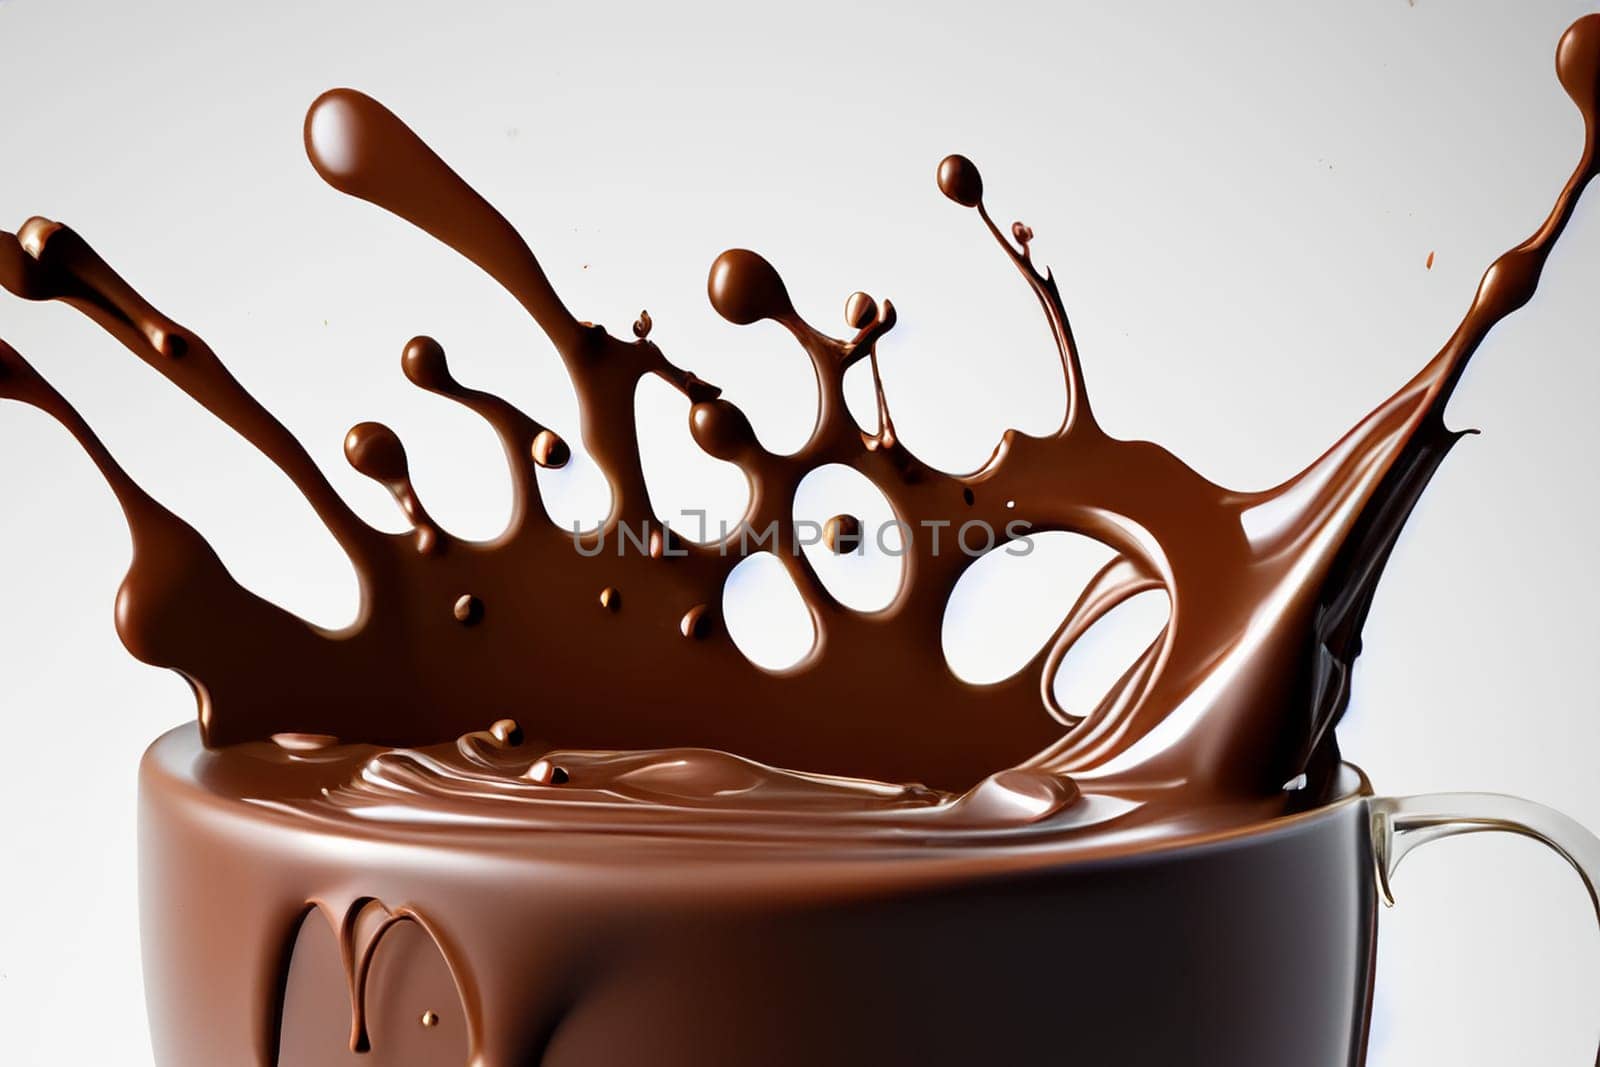 splash from chocolate on white background by compuinfoto